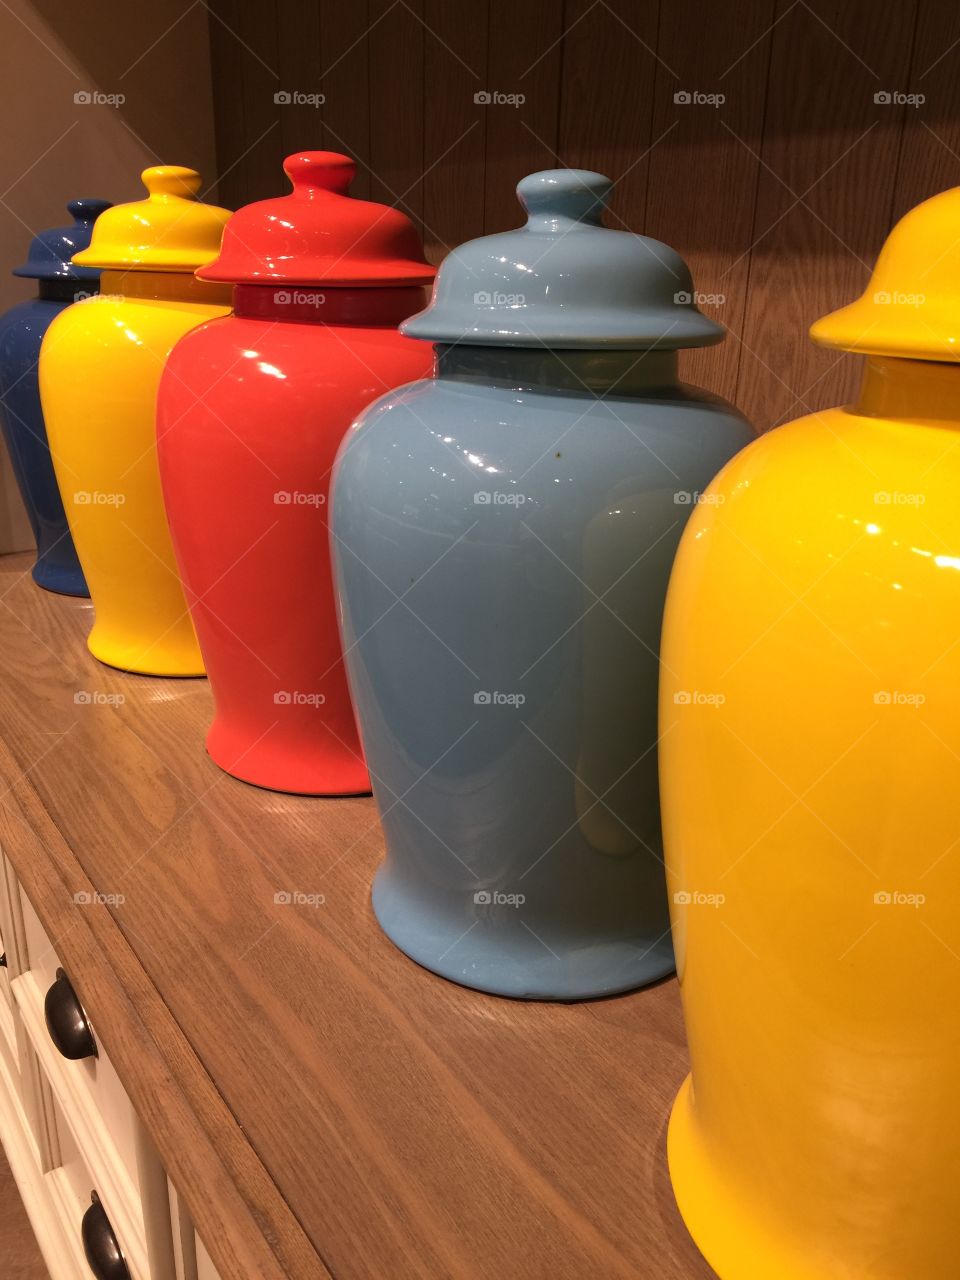 Primary Color Jars